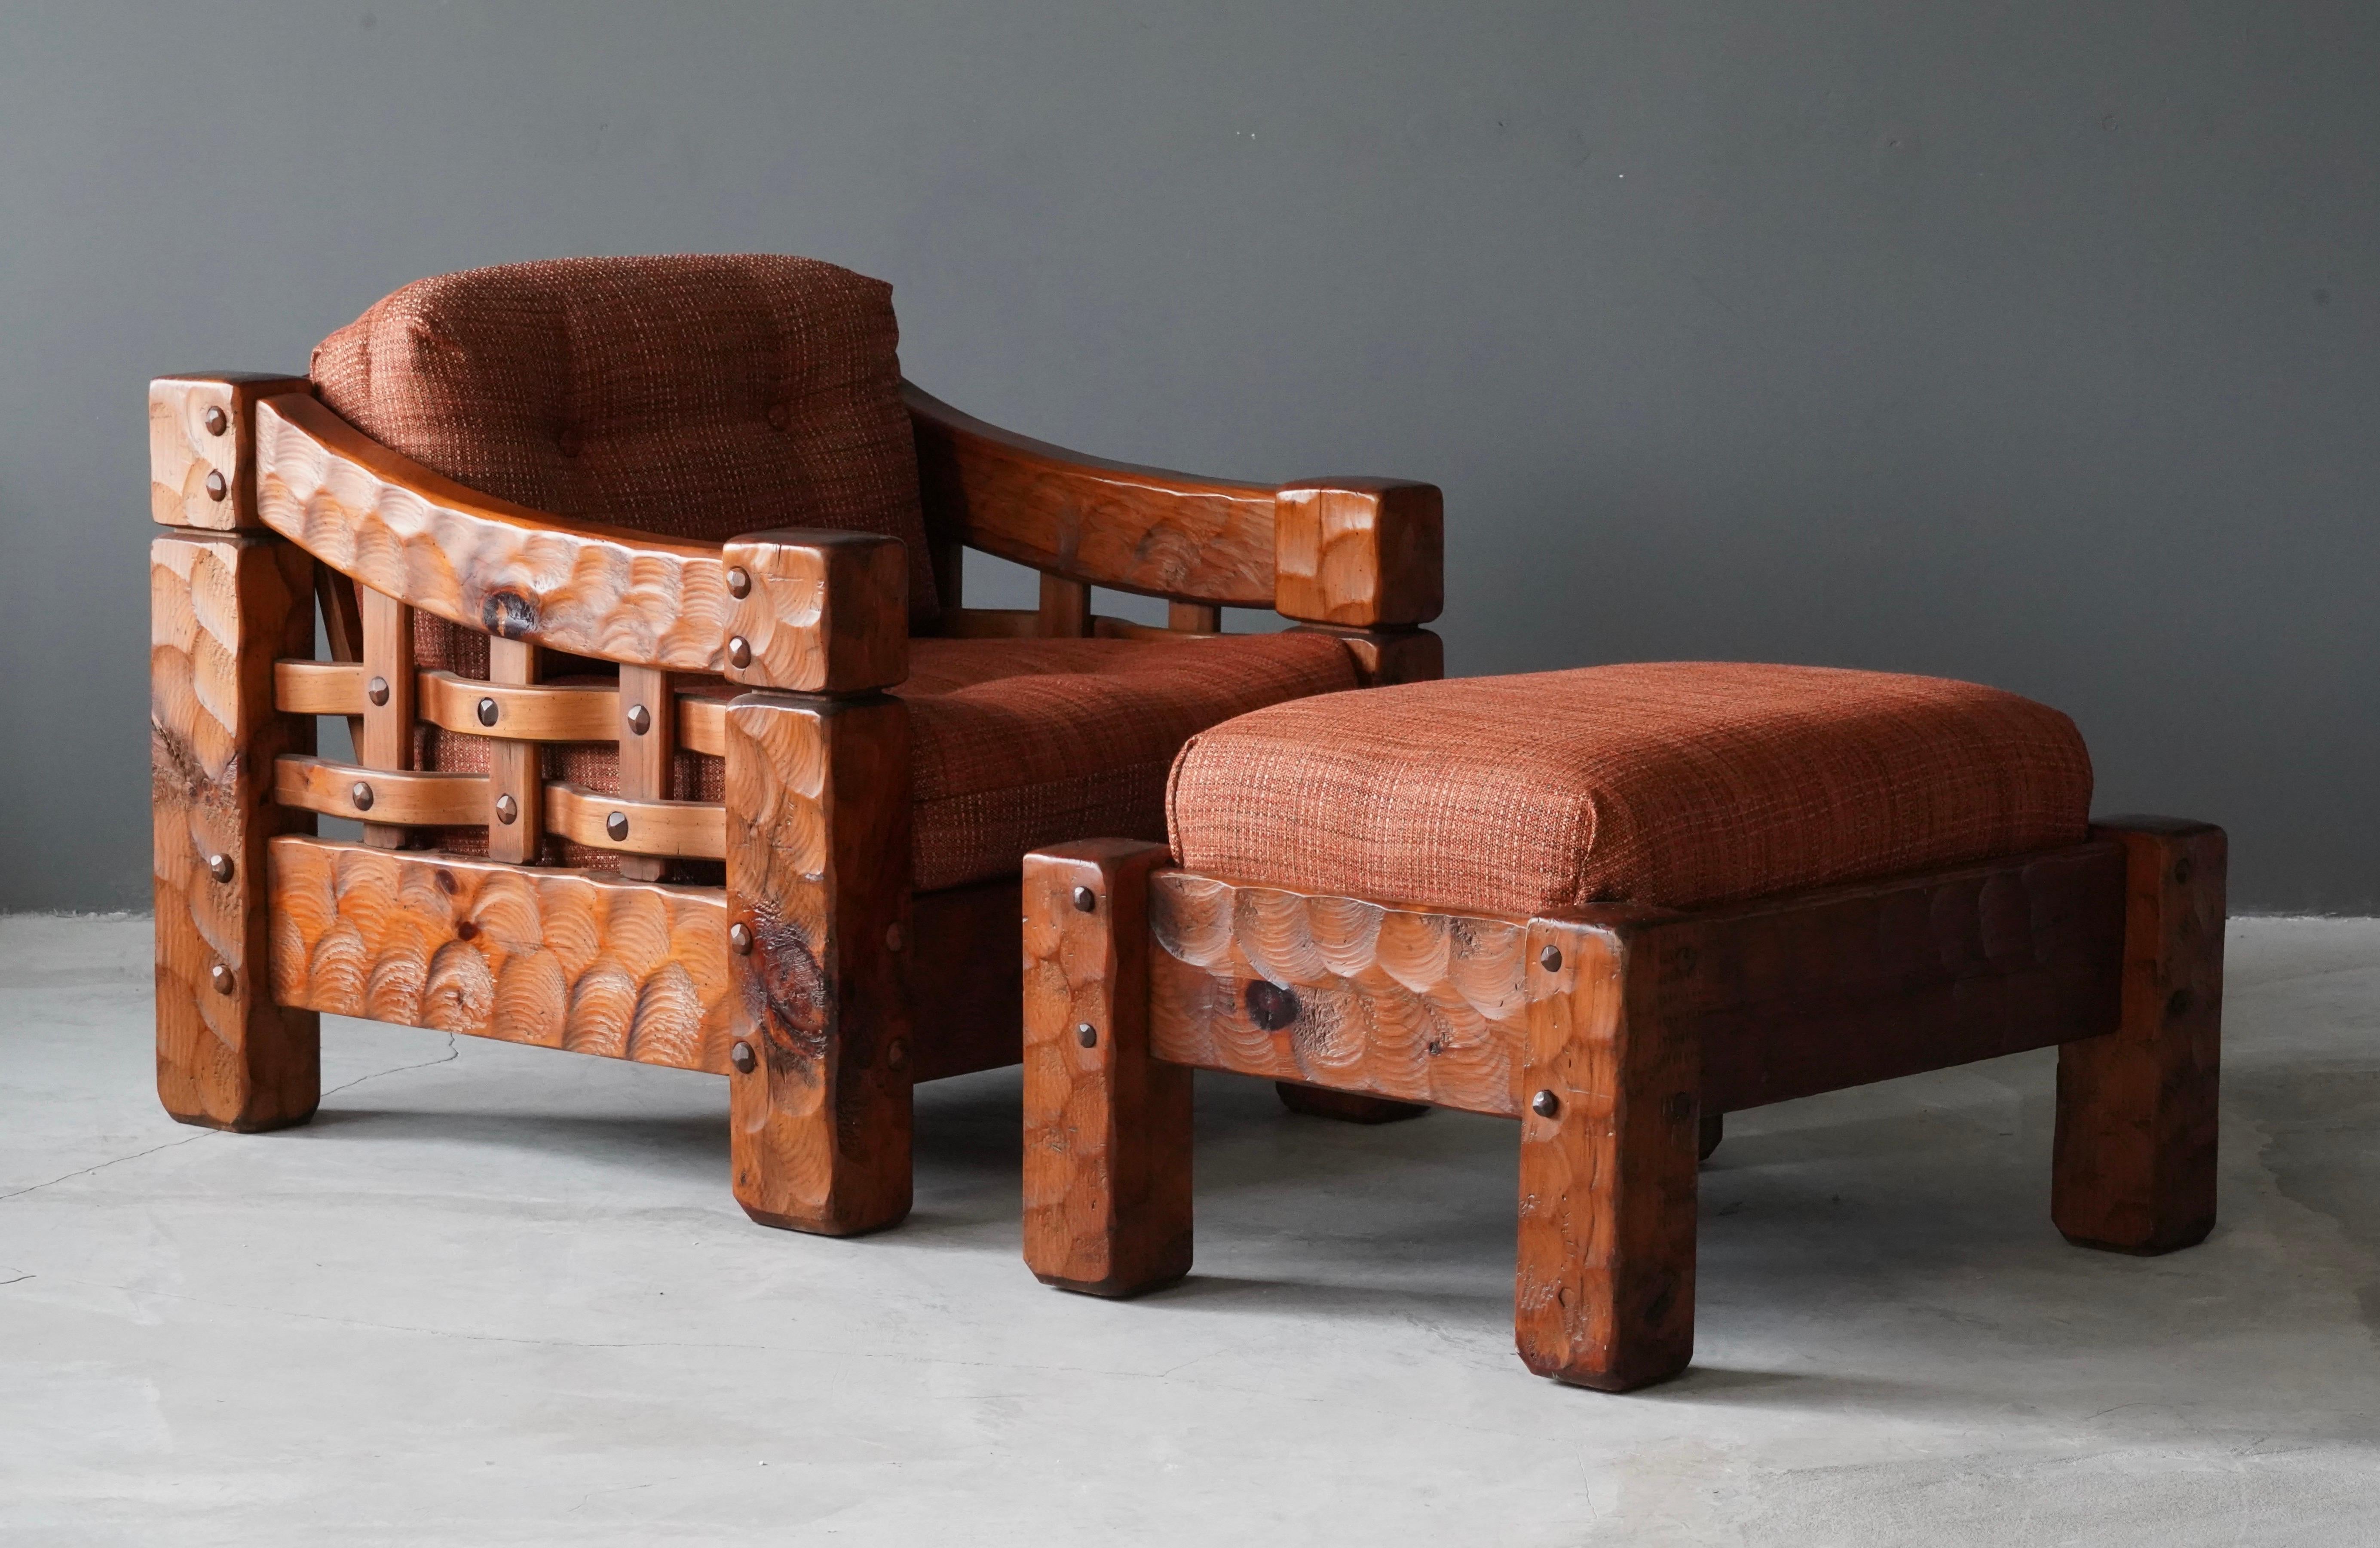 A pair of sizable lounge chairs with ottoman. In solid carved pine with revealed joinery. Features original red / orange fabric upholstered cushions. 

Large scale of chairs ottoman and material of cushions makes the chairs superbly comfortable.